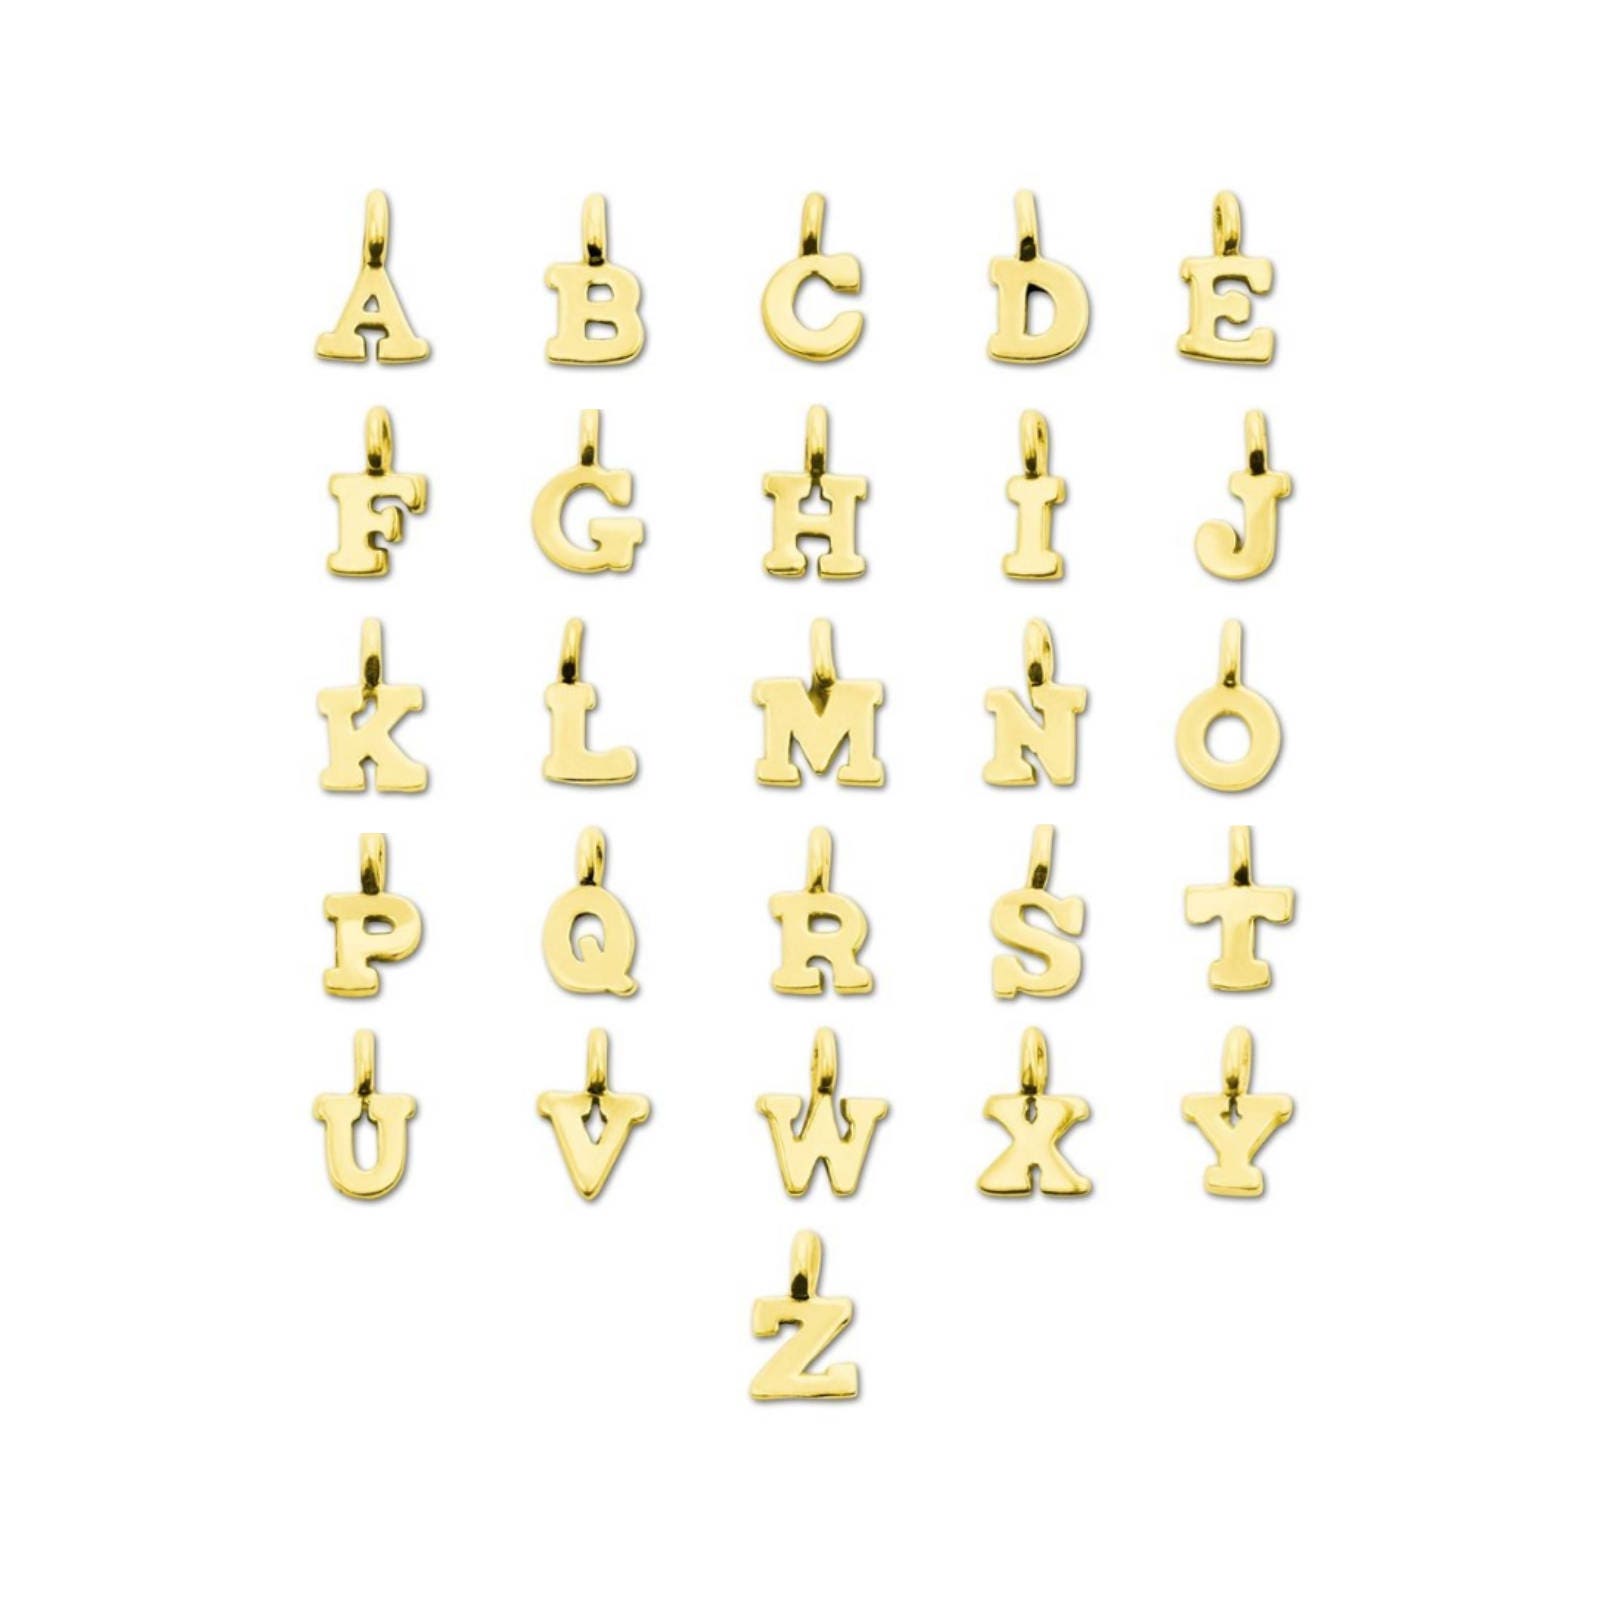 Tiny Gold Vermeil Block Letter Charms, Initial Charm, Approximately 8mm, Wholesale Letter Charms, Bulk Alphabet Charms (G902)